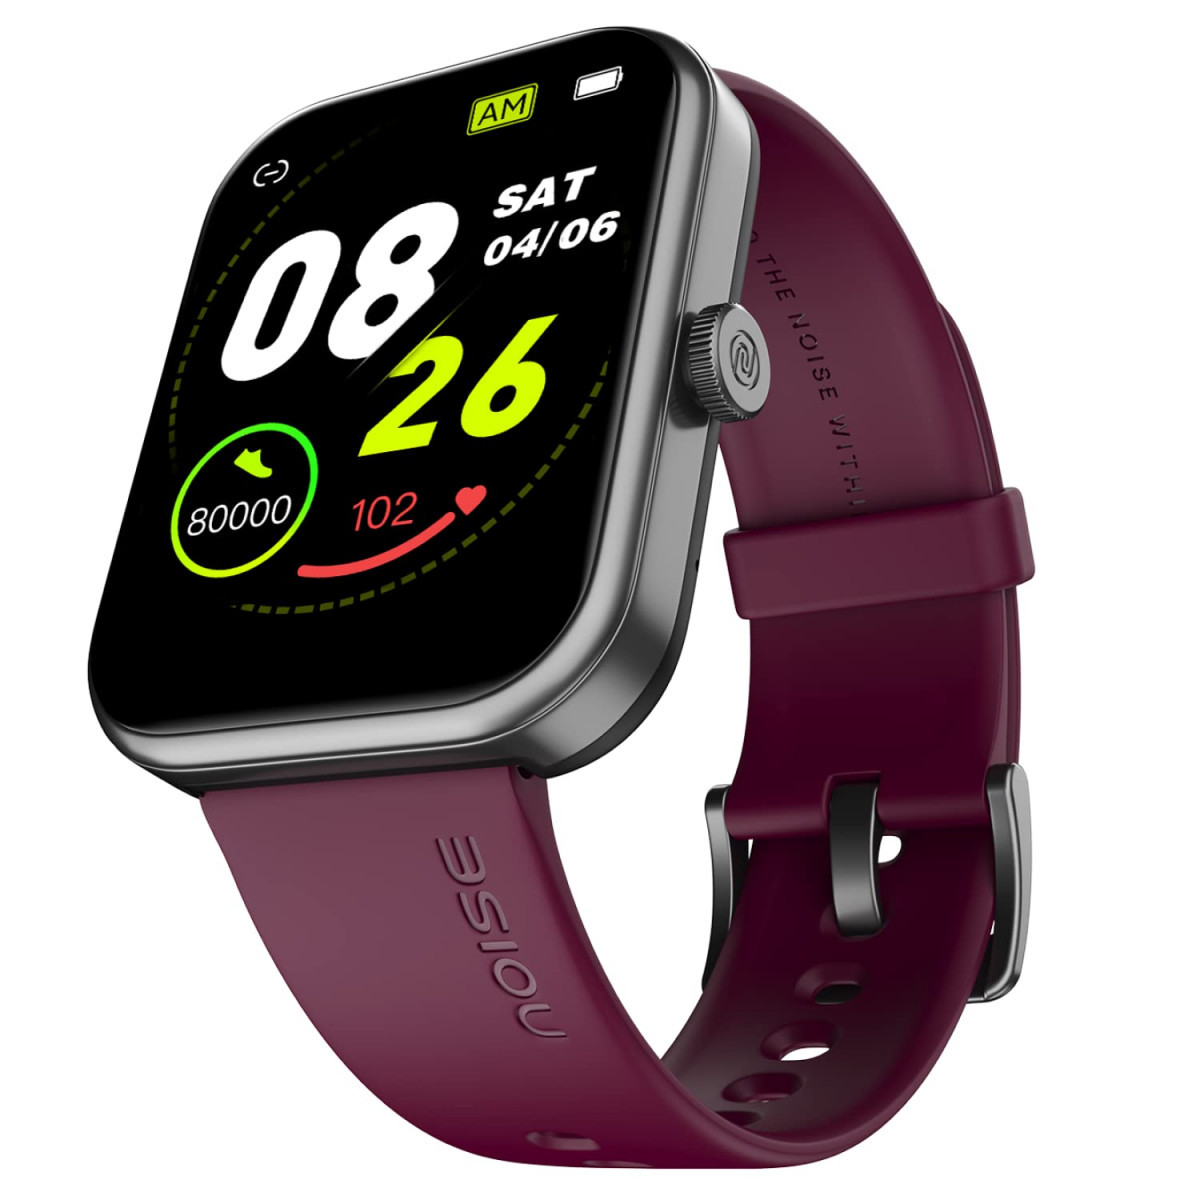 Noise Pulse 2 Max 185 Display Bluetooth Calling Smart Watch 10 Days Battery 550 NITS Brightness